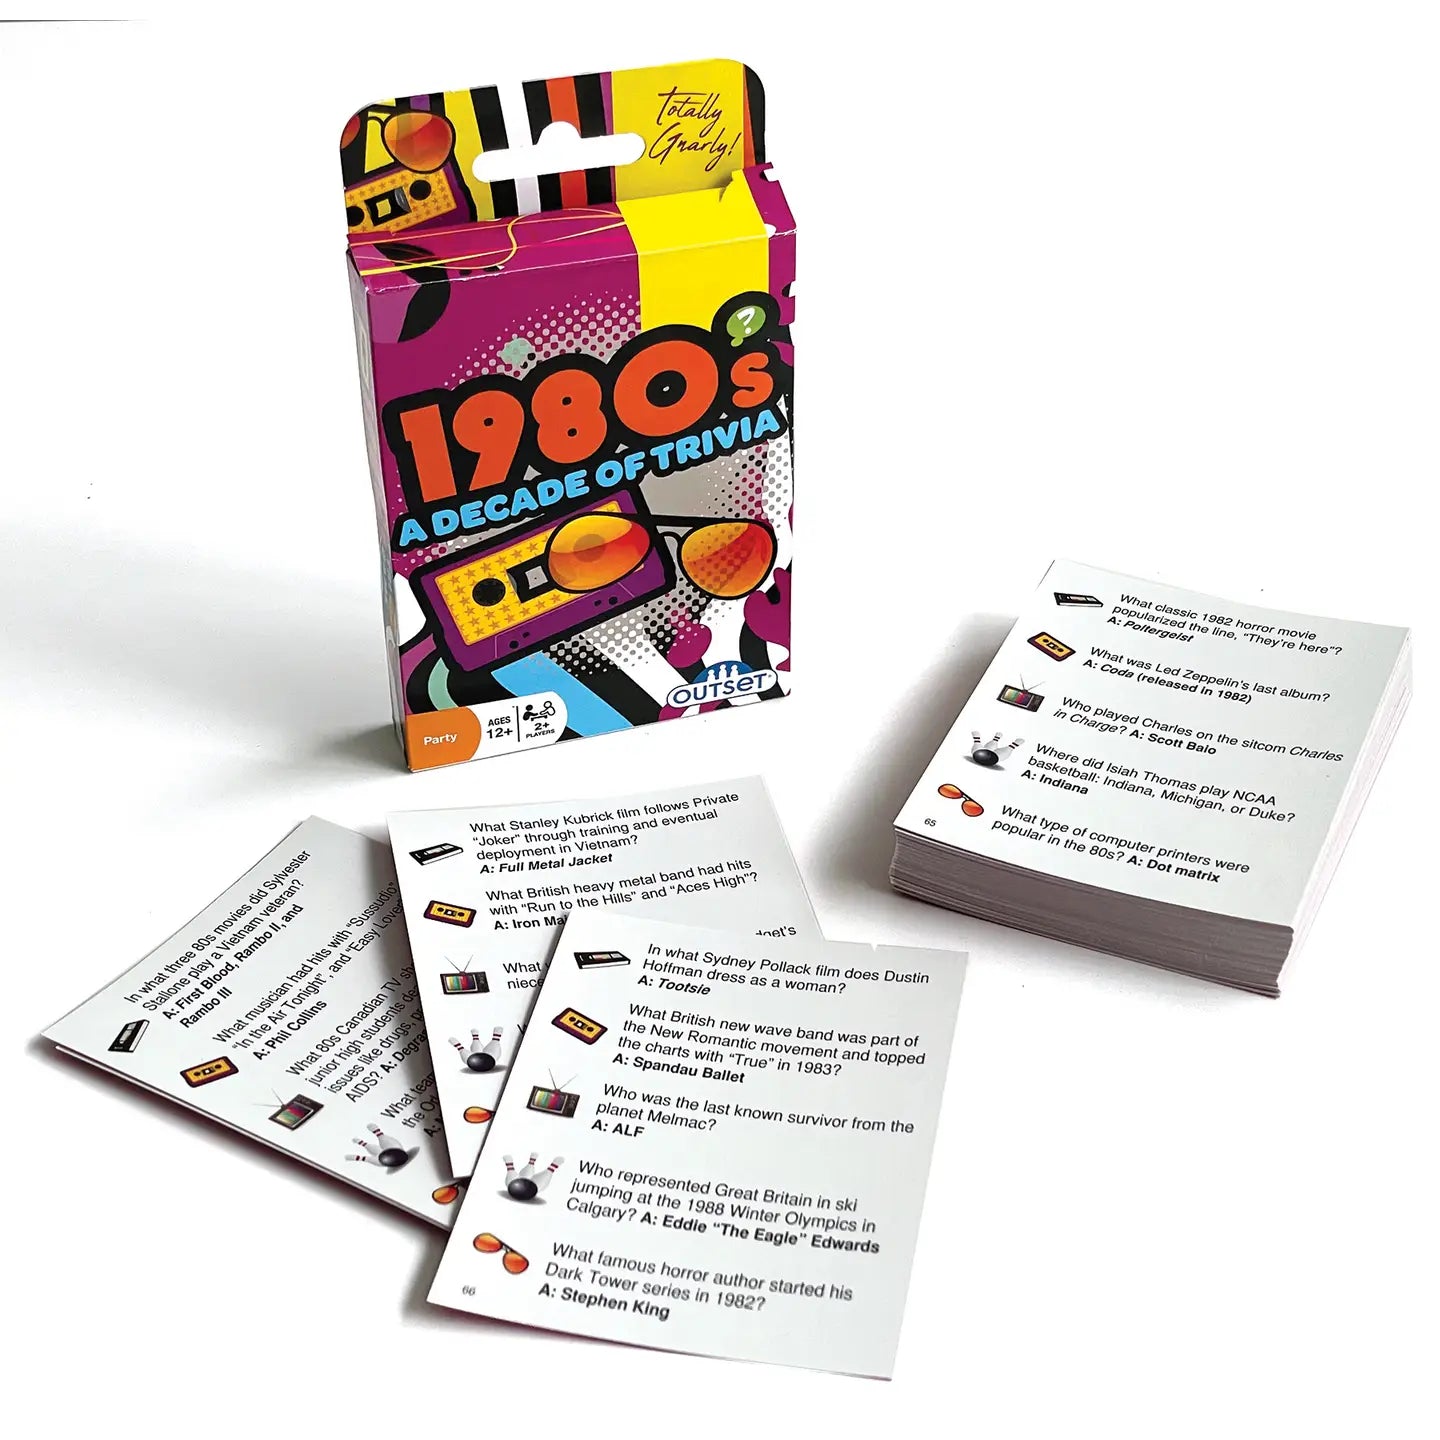 1980s - A Decade of Trivia Card Game